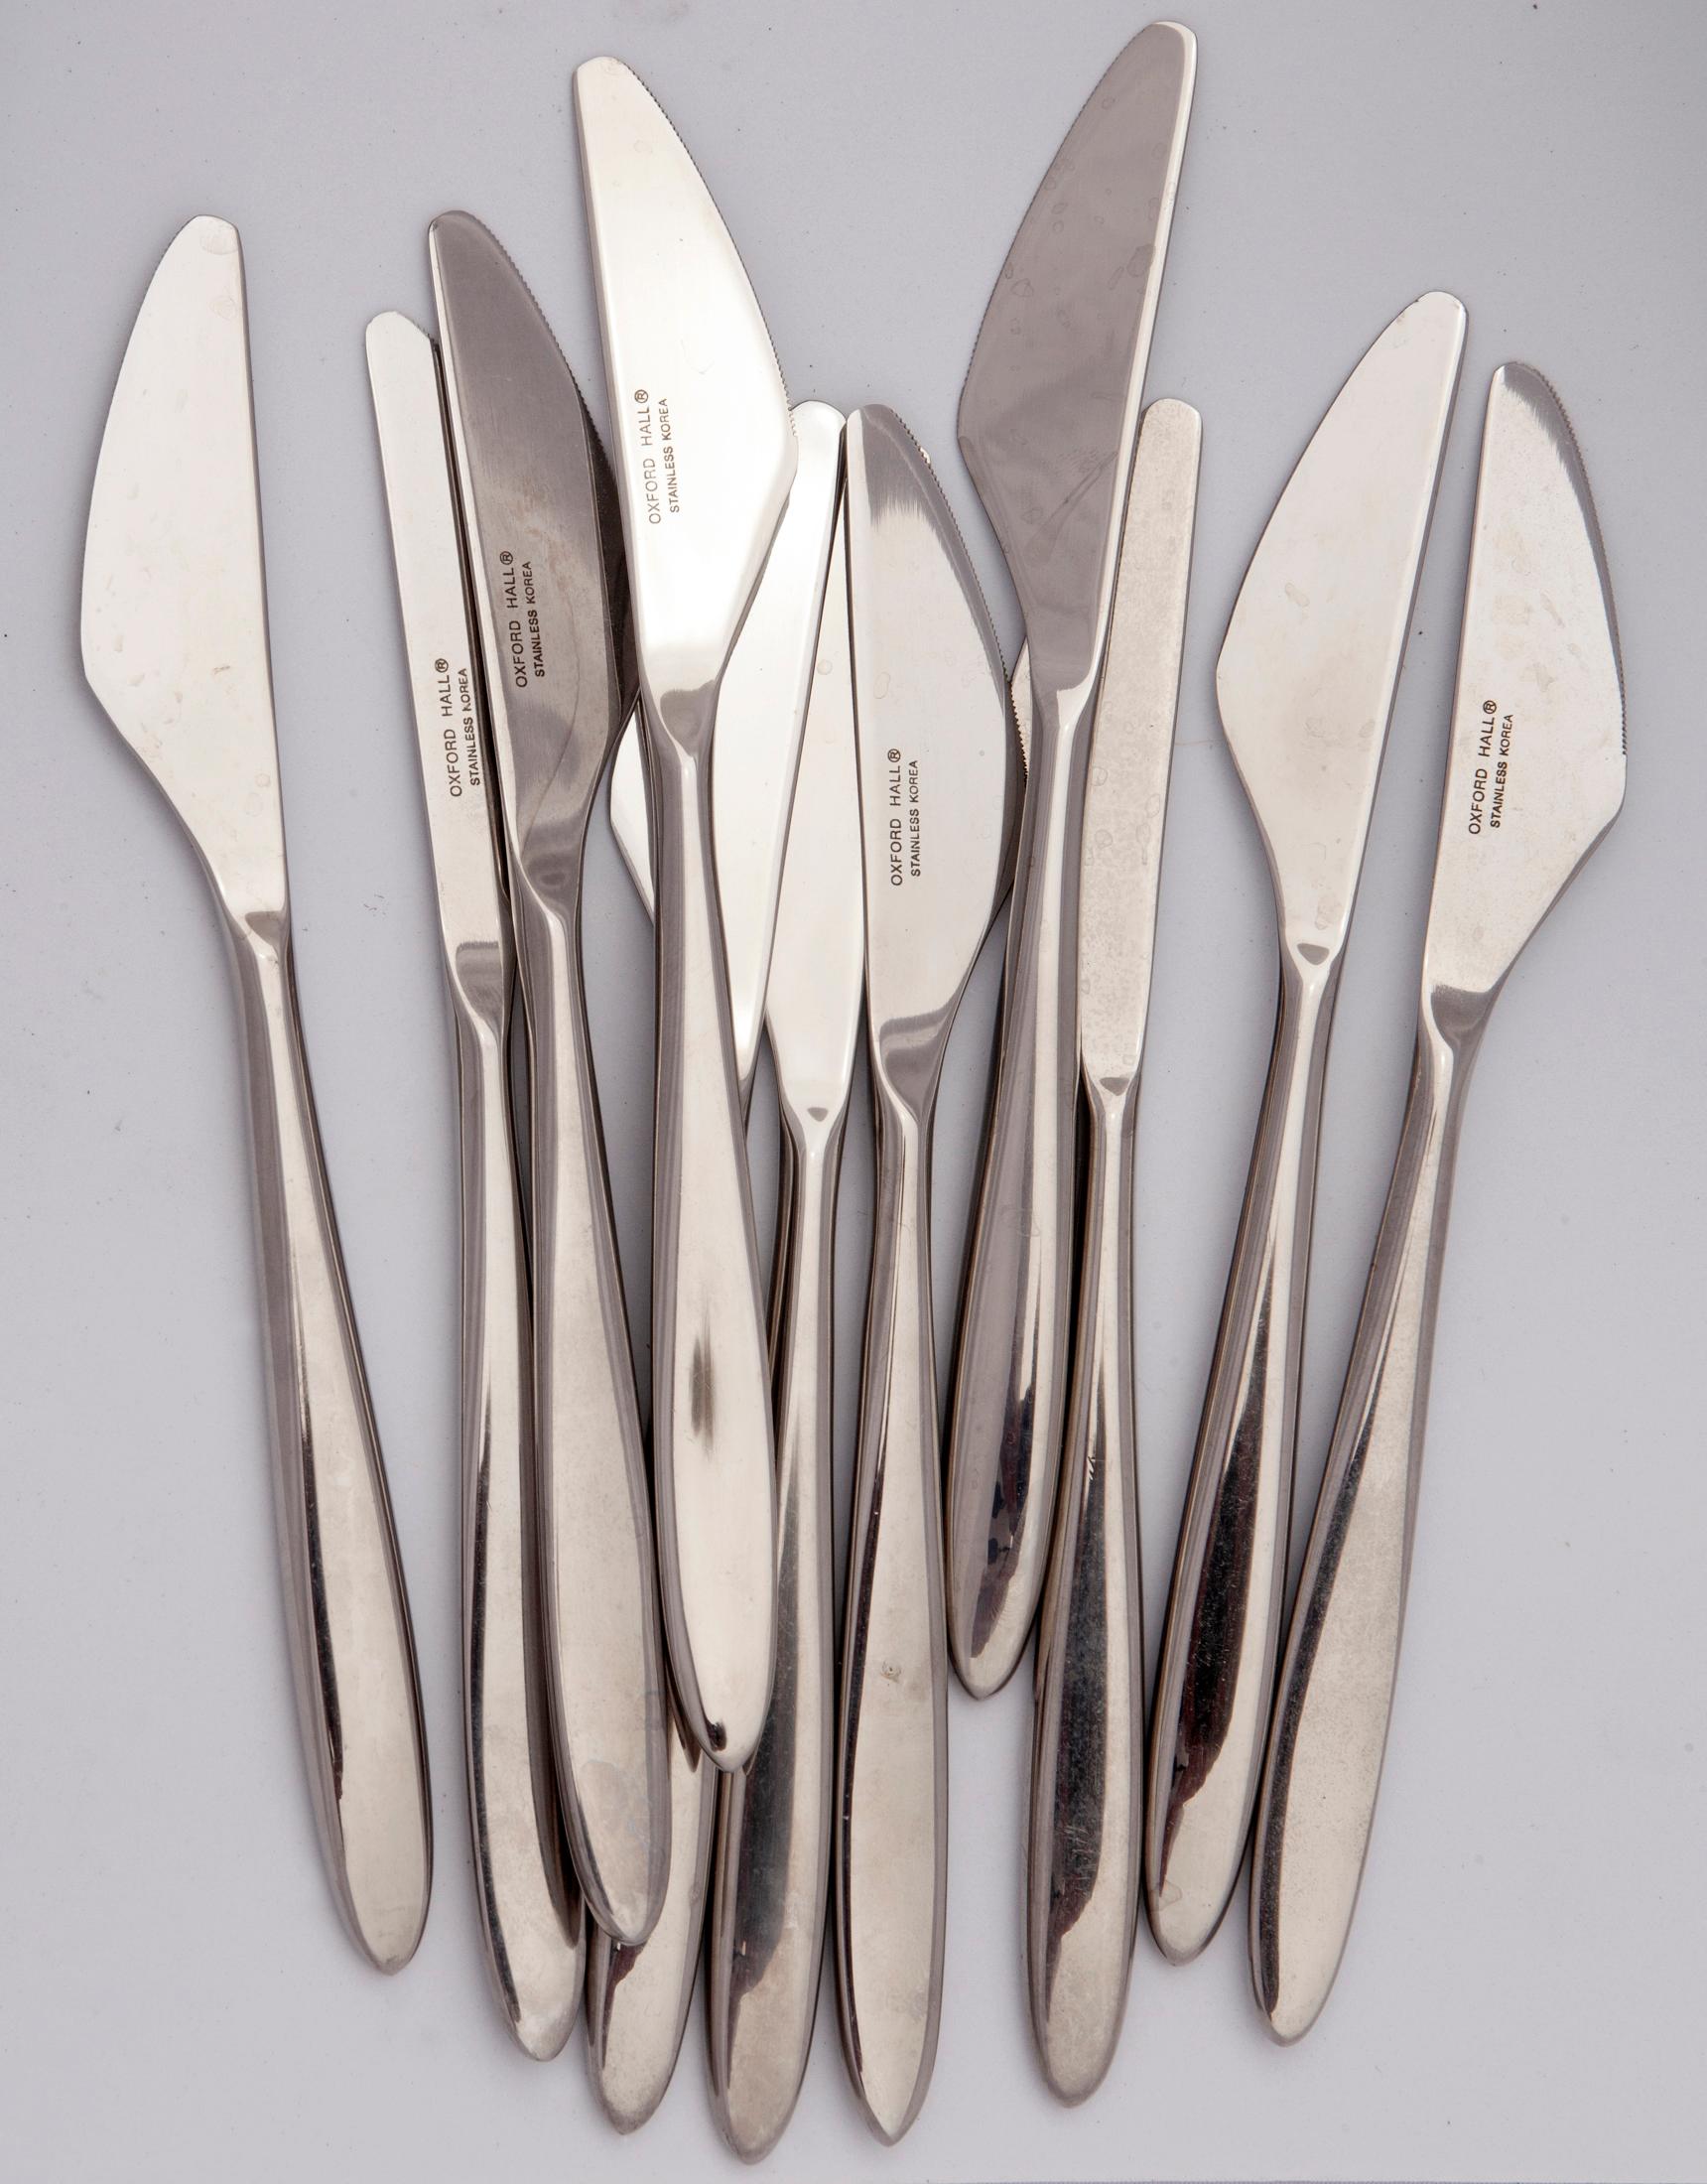 Mid-Century Modern Scandinavian Modern Style Stainless-Steel Flatware by Oxford Hall; 60 pieces